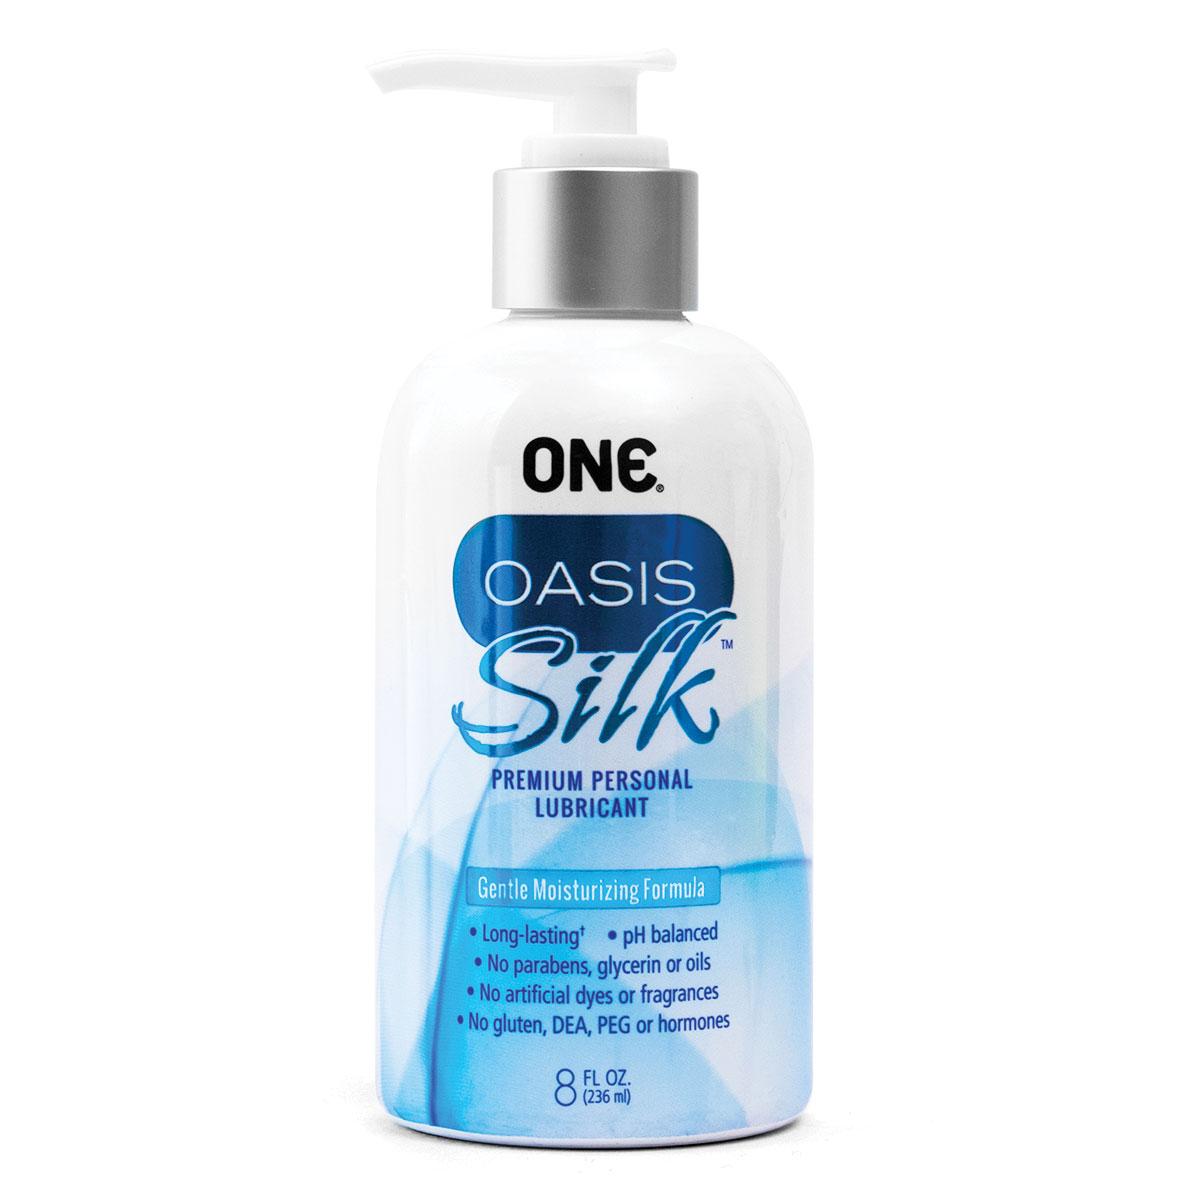 ONE Oasis Silk Lubricant